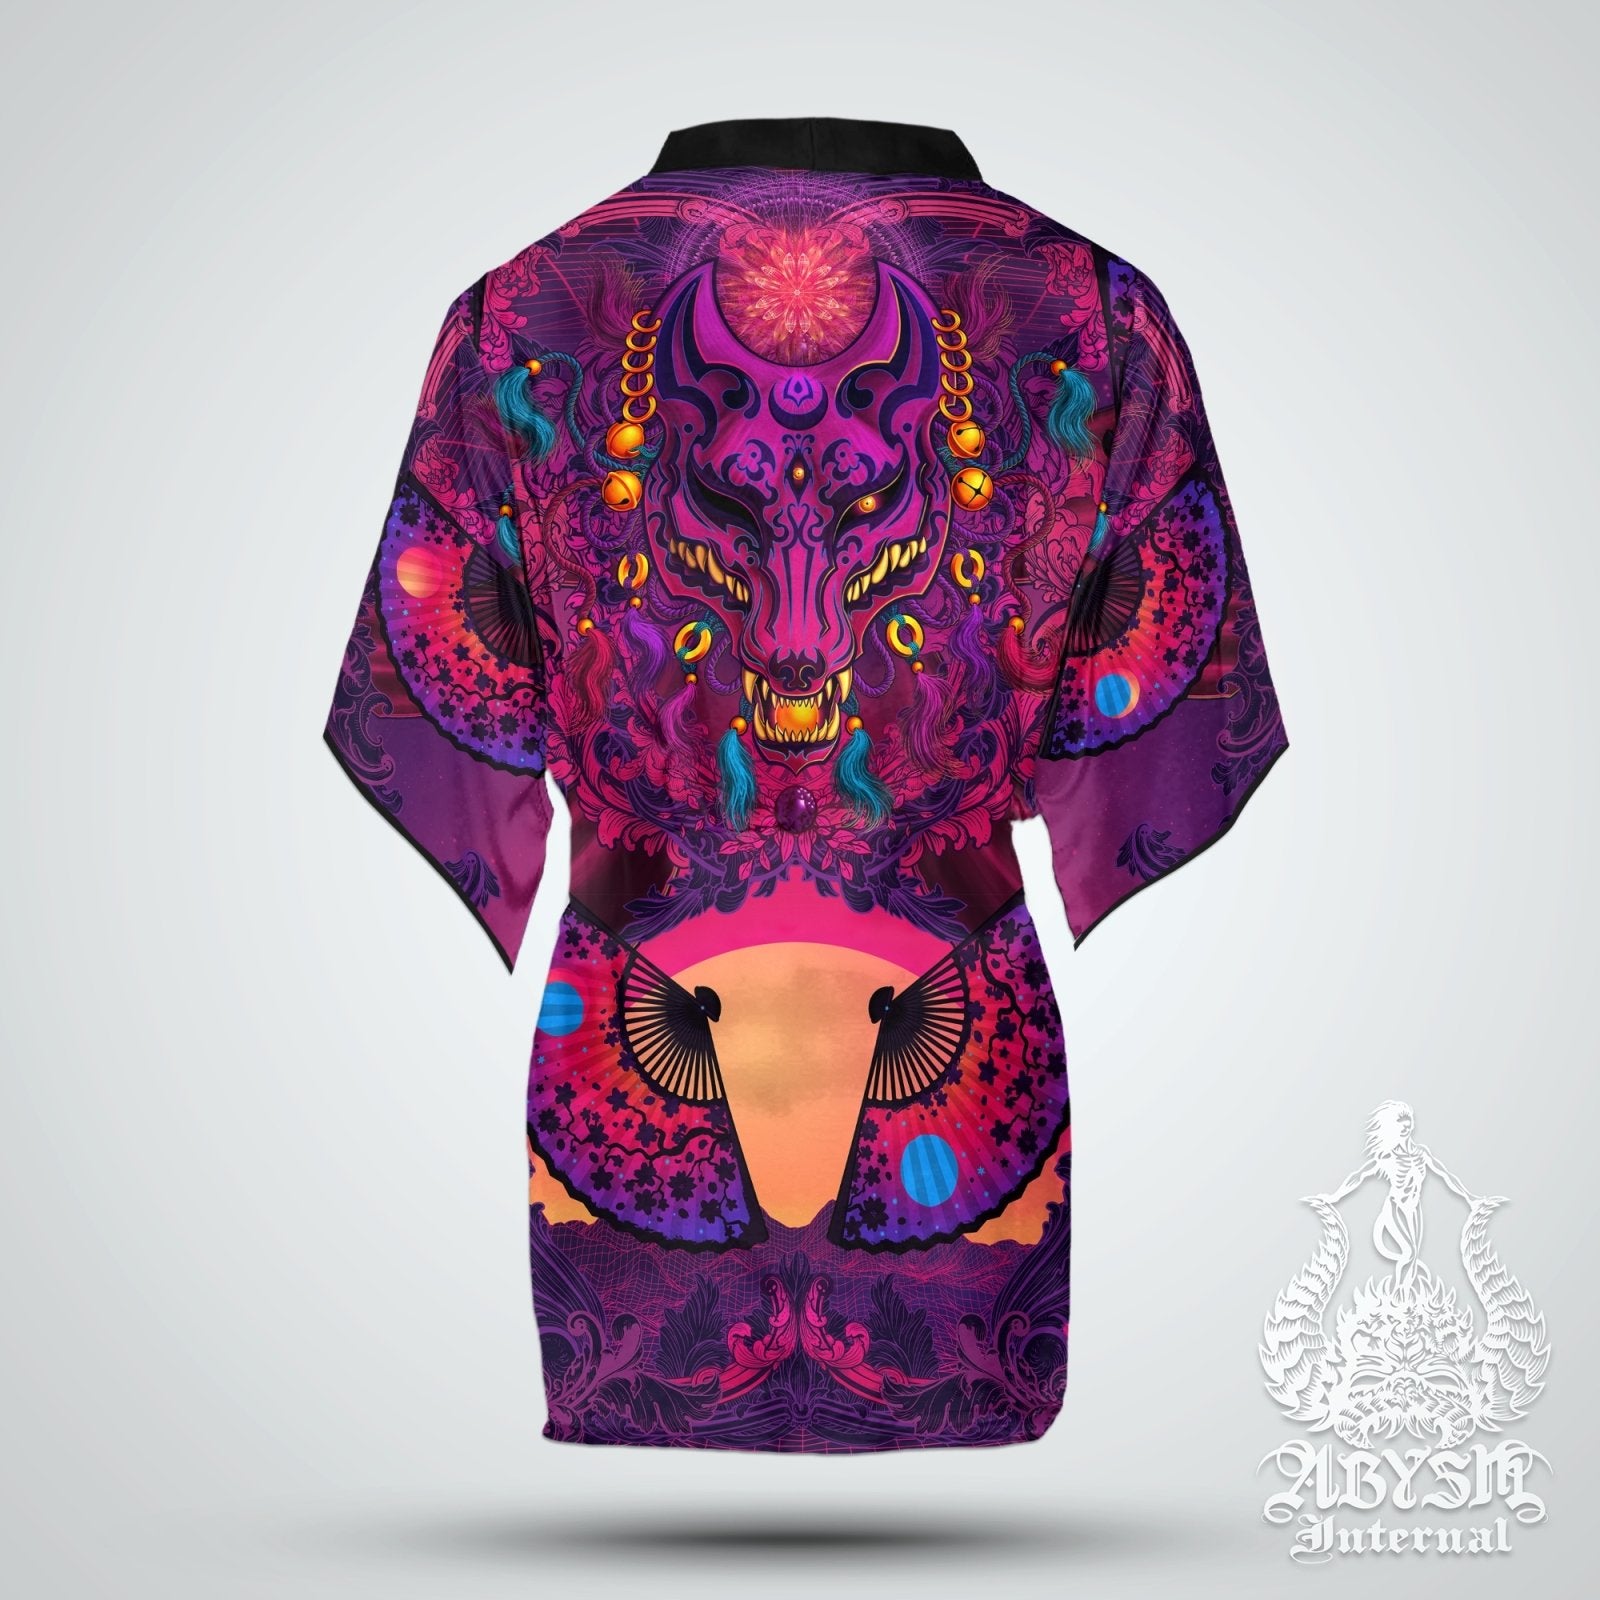 Anime Convention Cover Up, Synthwave Outfit, Retrowave Party Kimono, Vaporwave Summer Festival Robe, Japanese Art, Psychedelic 80s, Alternative Clothing, Unisex - Kitsune - Abysm Internal